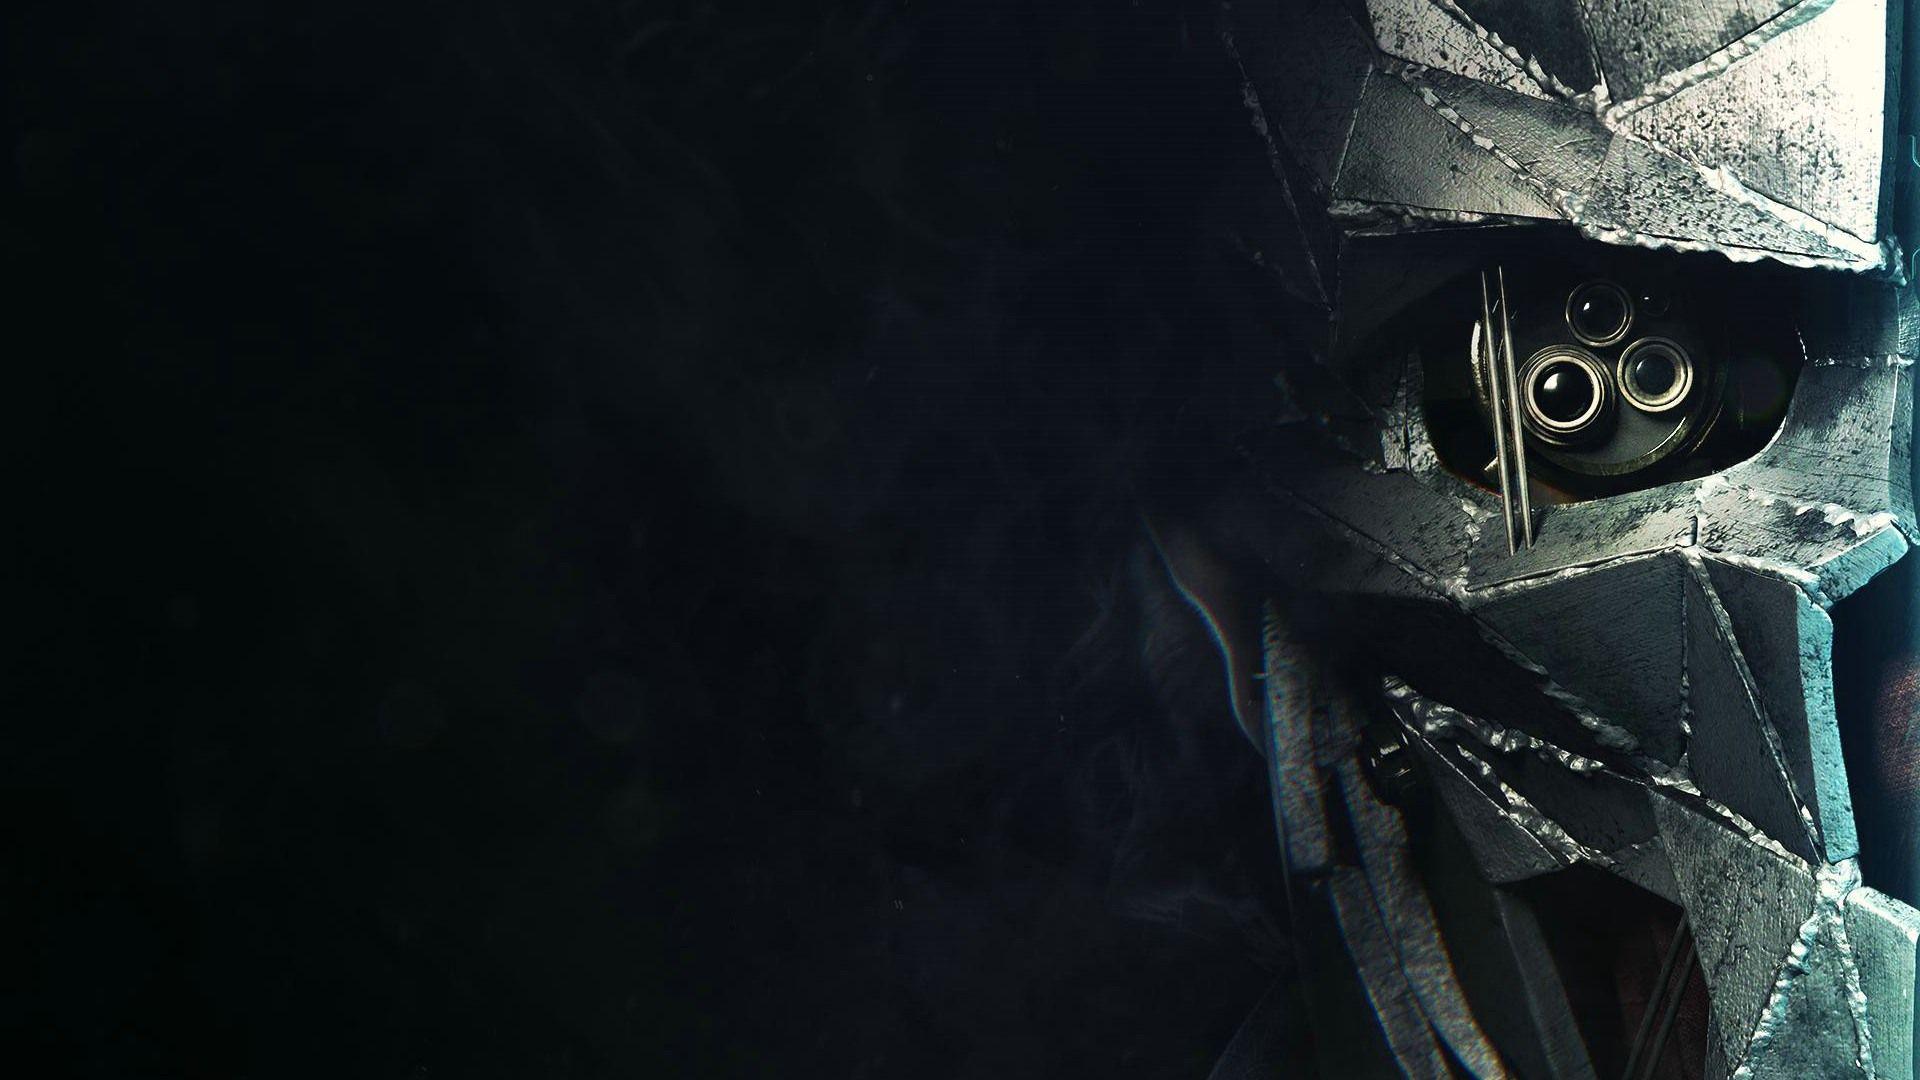 Dishonored 2 Mask Wallpaper Image Gallery